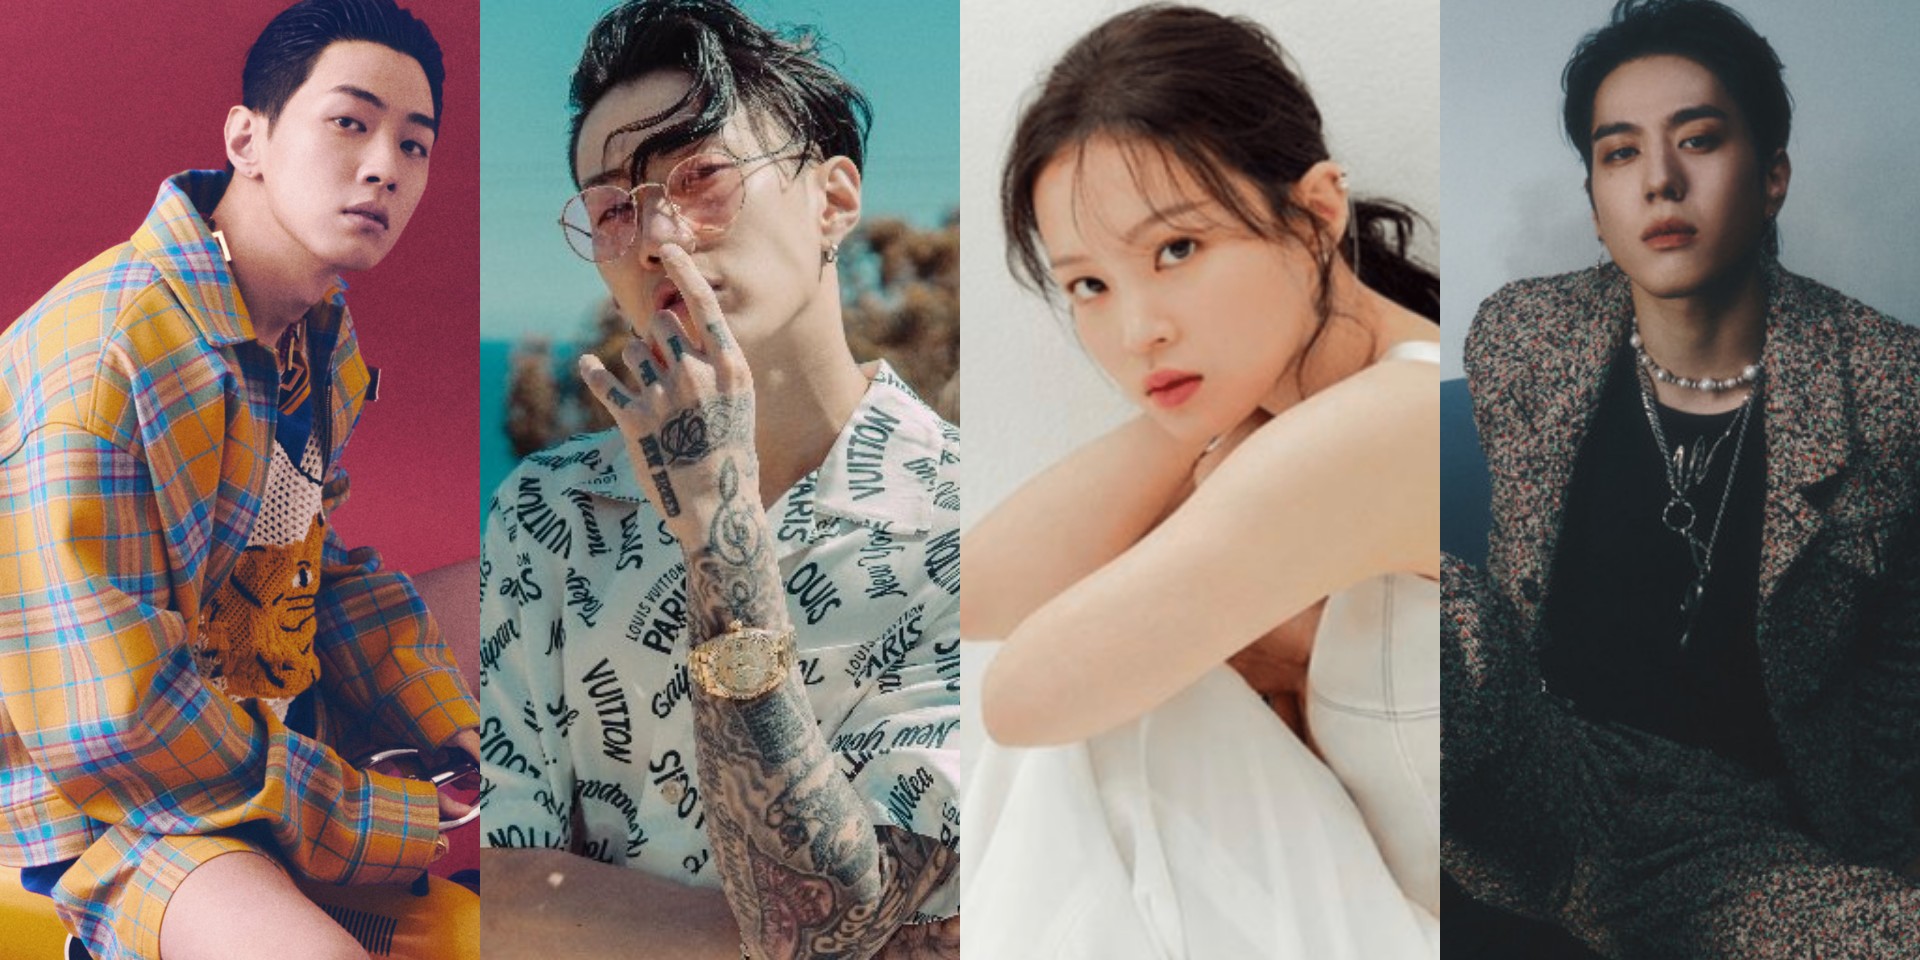 Get to know the artists behind AOMG – Jay Park, GRAY, Lee Hi, GOT7's